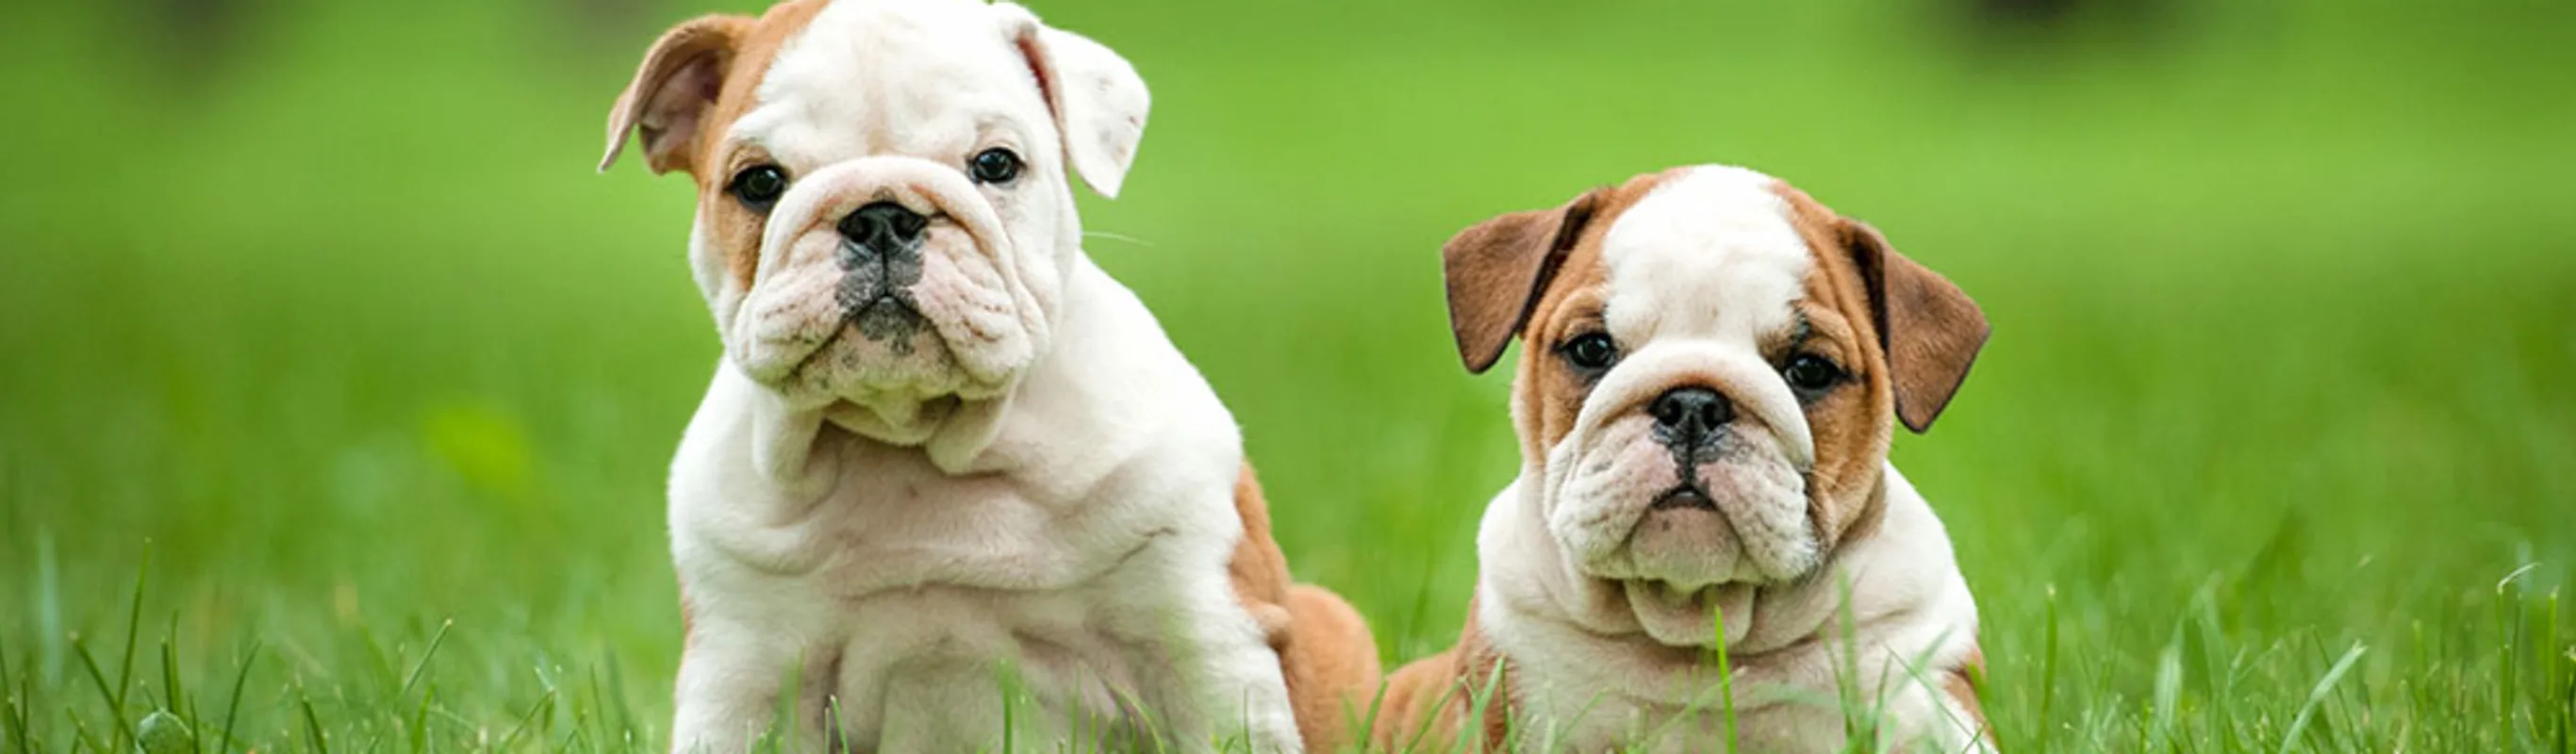 English Dogs sitting in grass looking straight